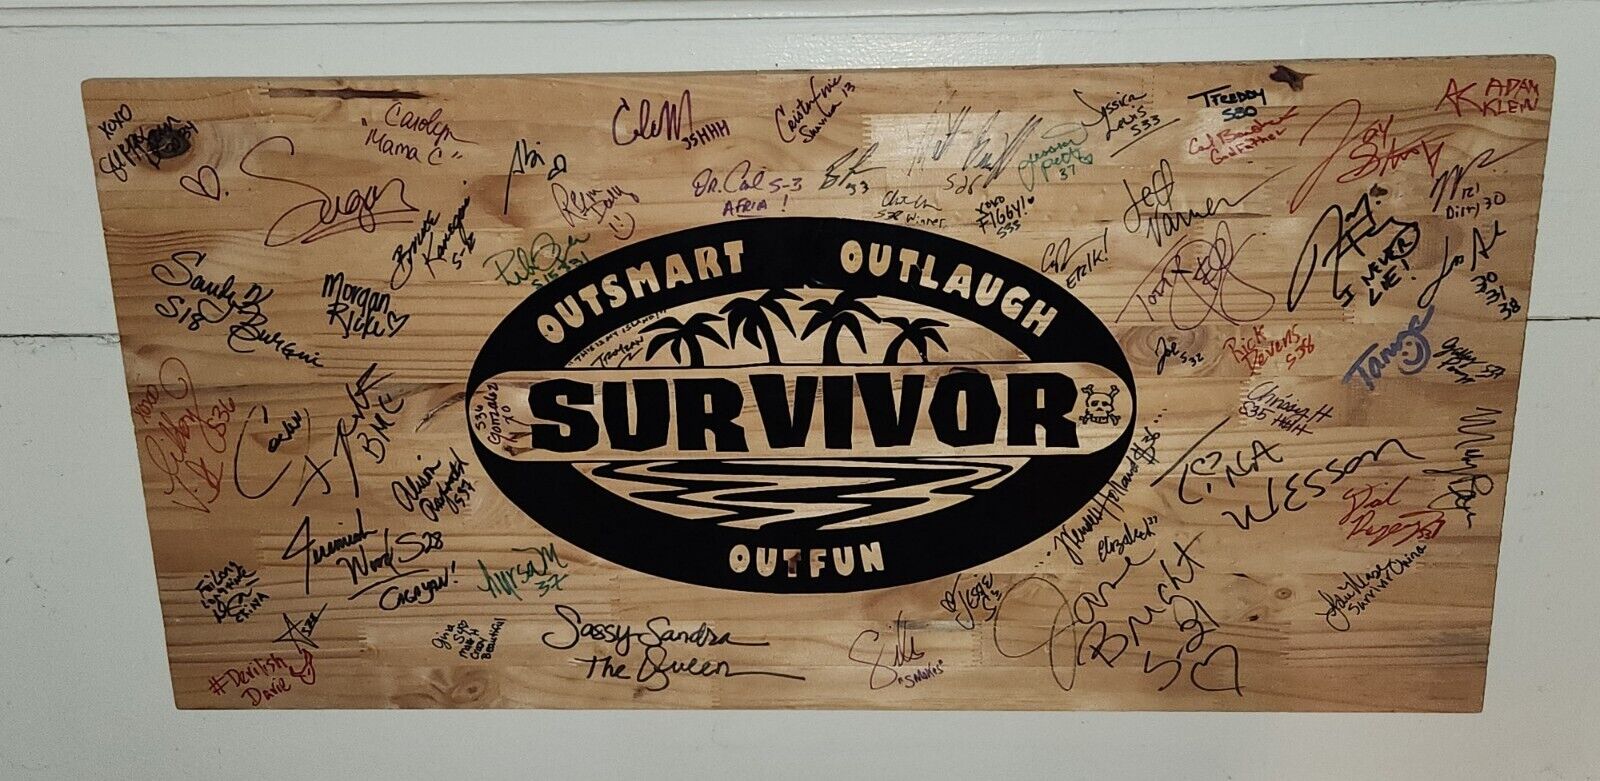 huge wooden board autographed by Survivors CBS Sandra Todd  Tina